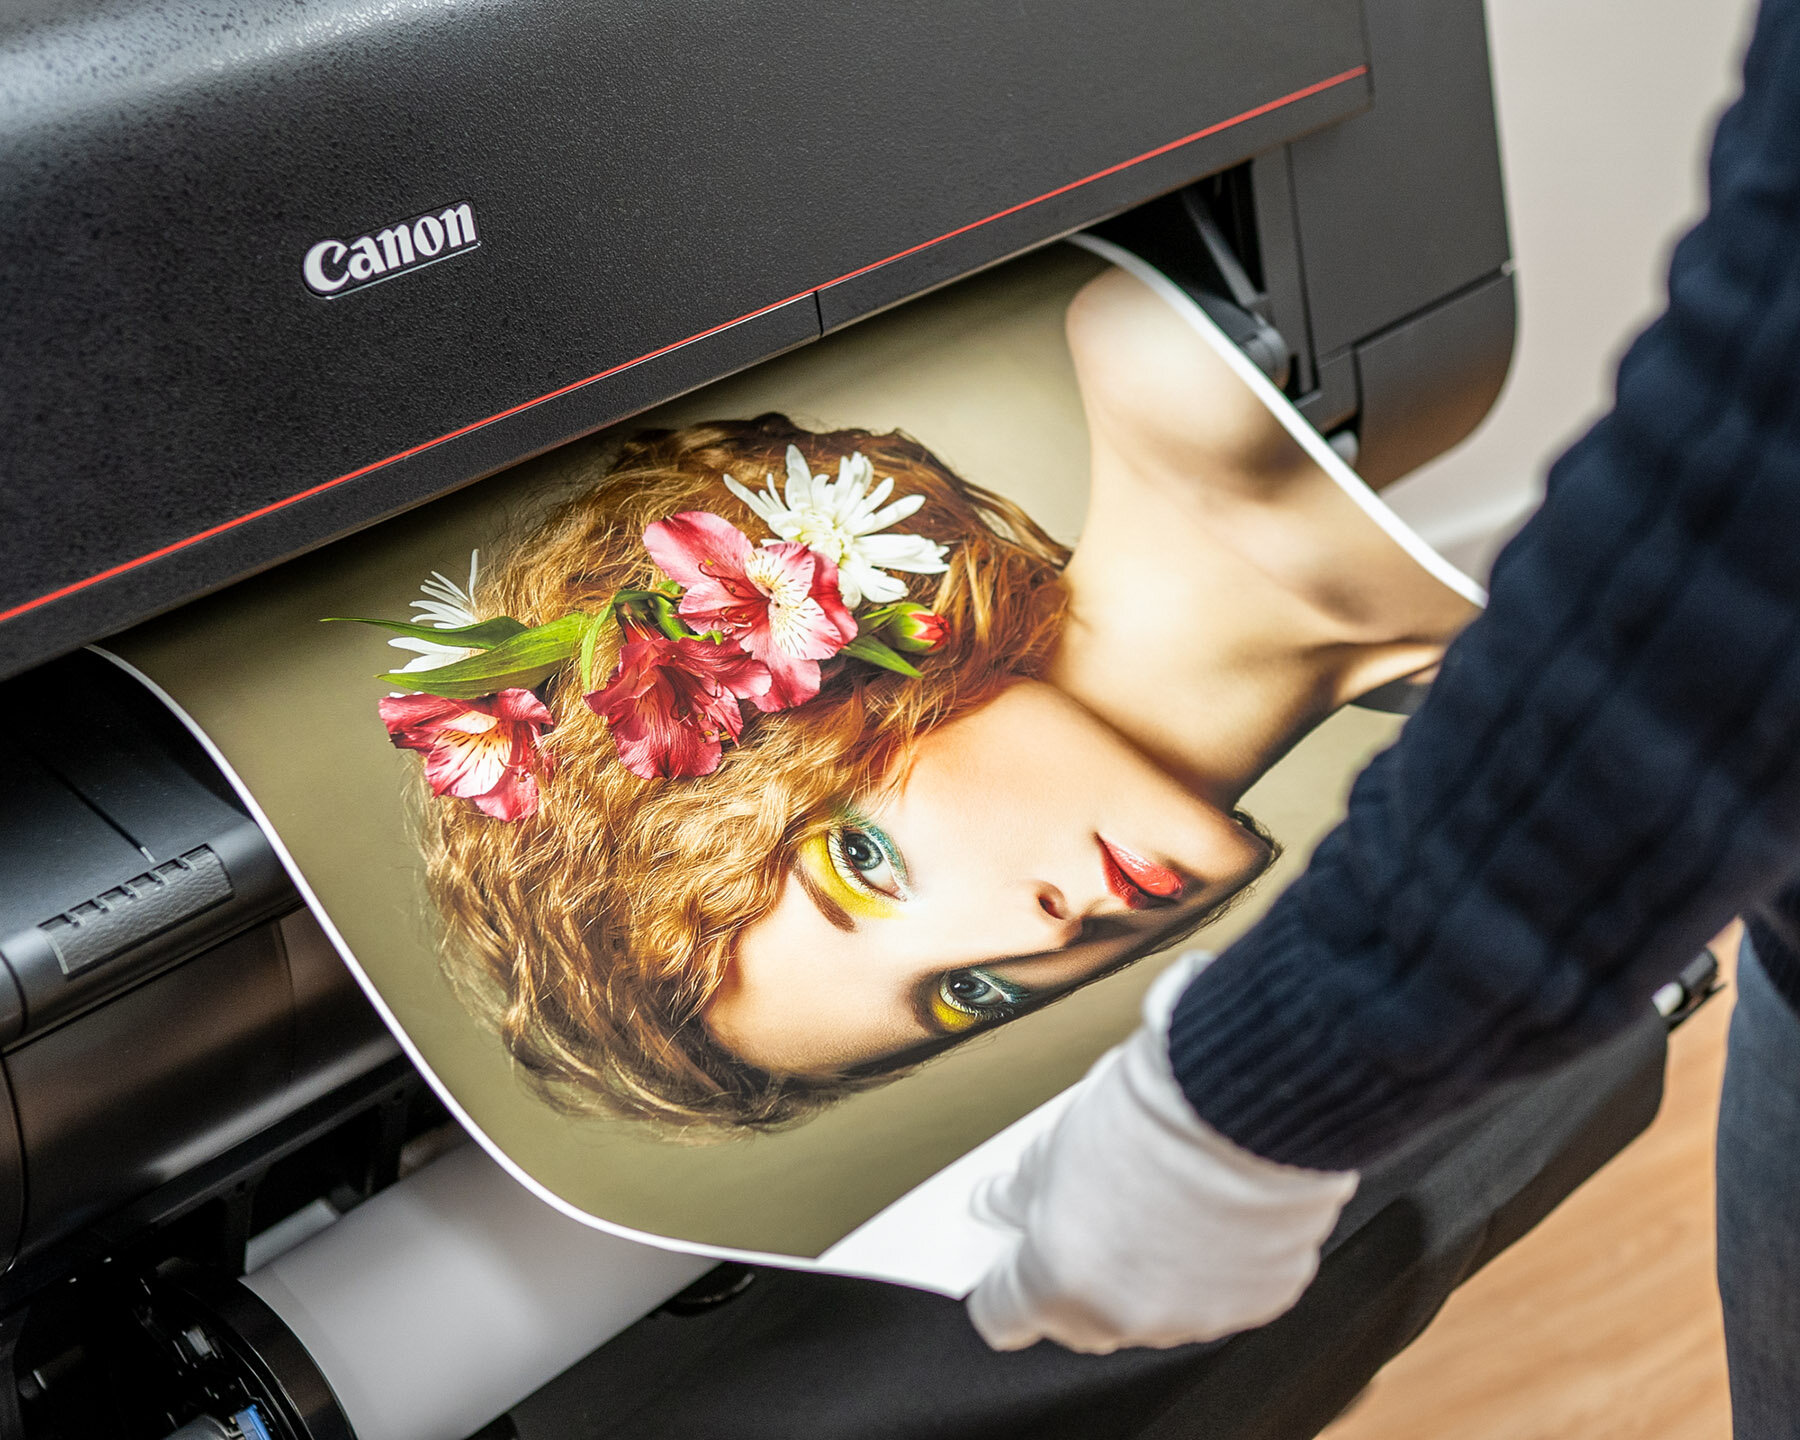 Fabric Printers in the UK - The Sewing Directory